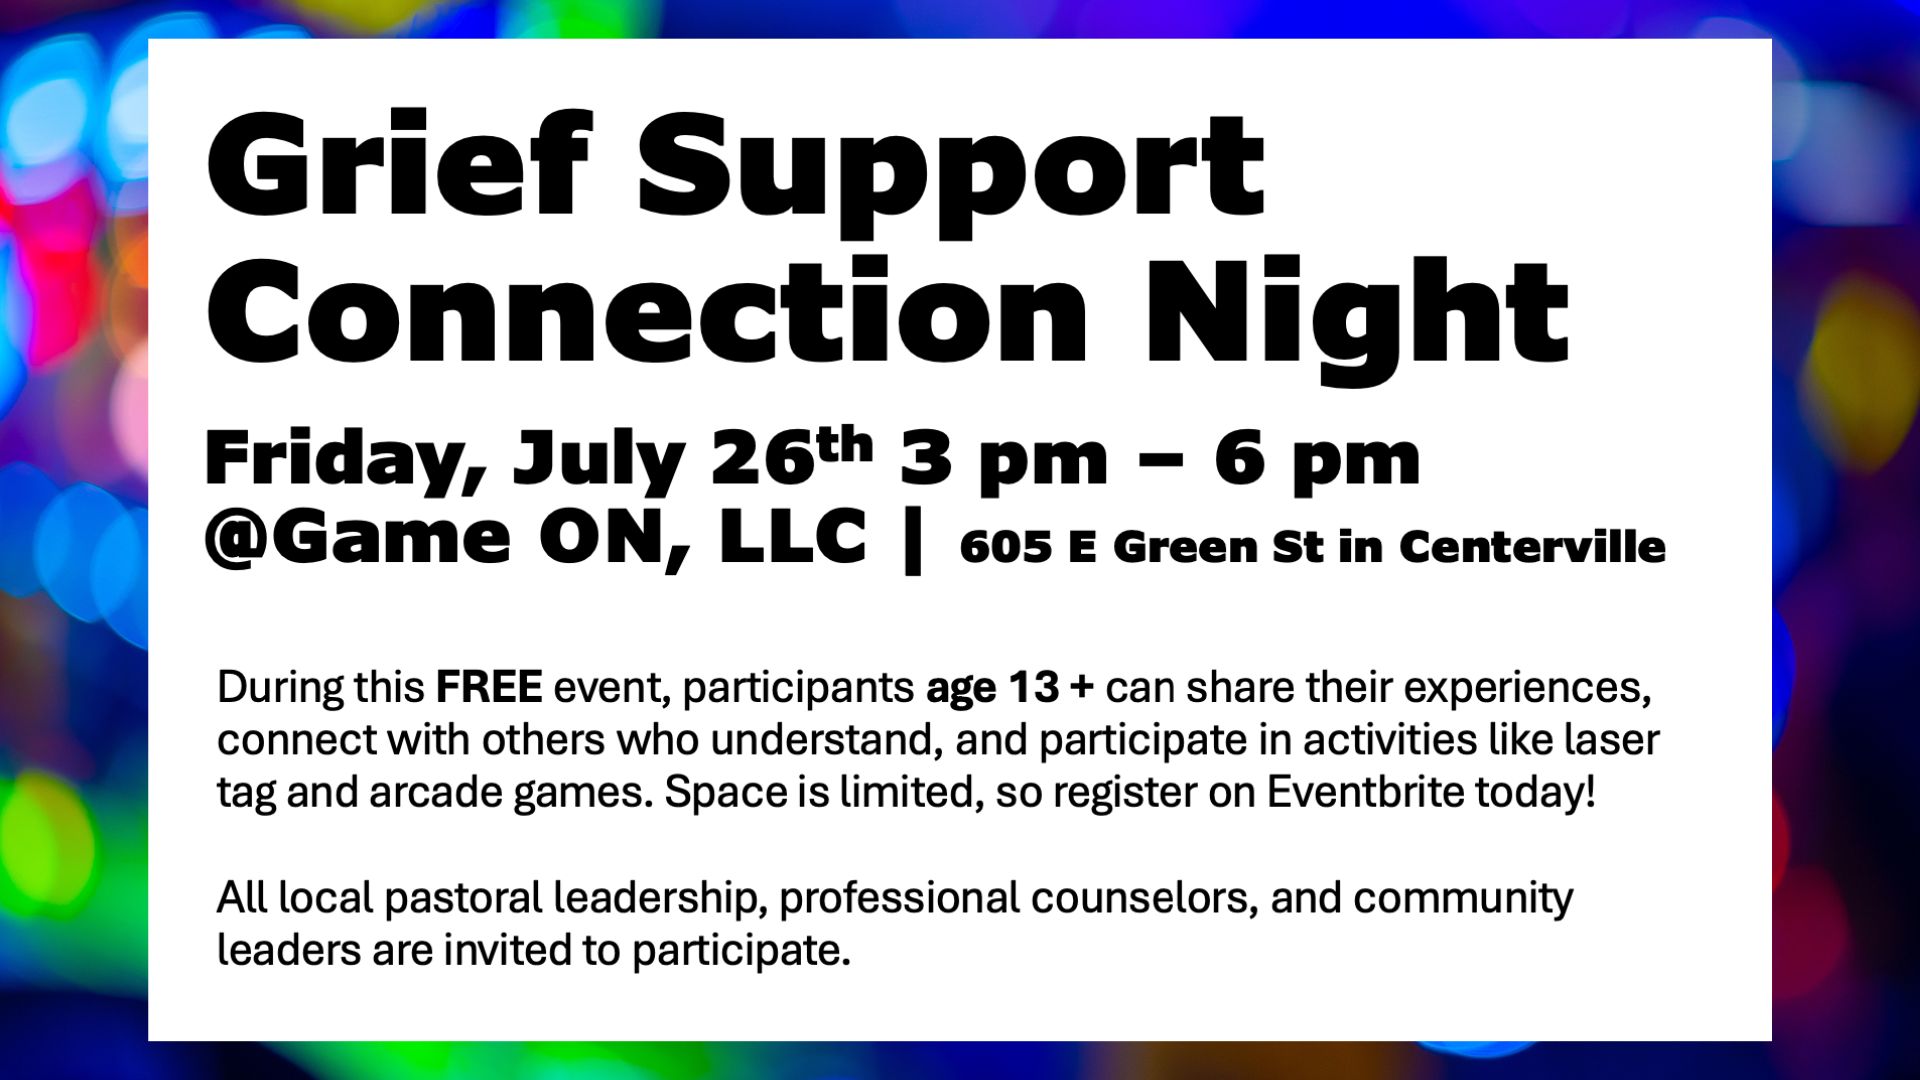 Grief Support Connection Night at Game On July 26th